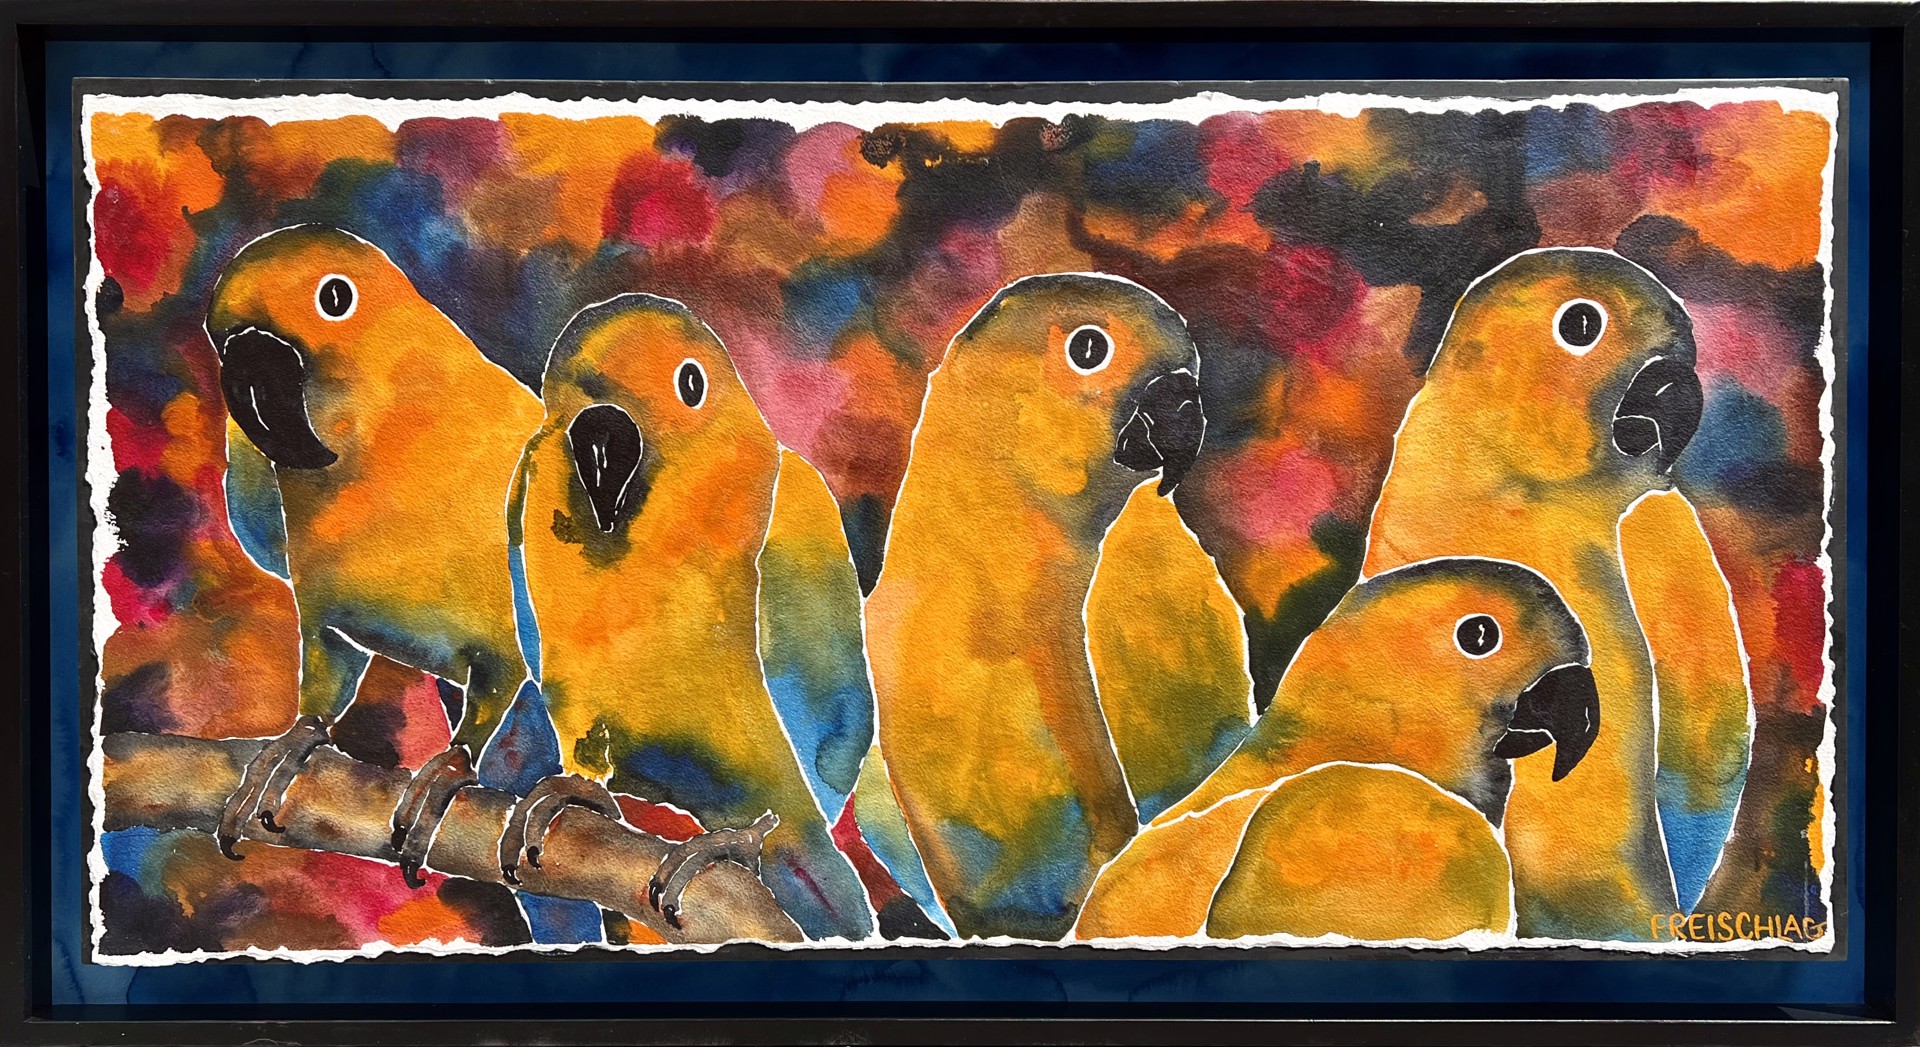 The Yellow of Some Birds by Peter Freischlag